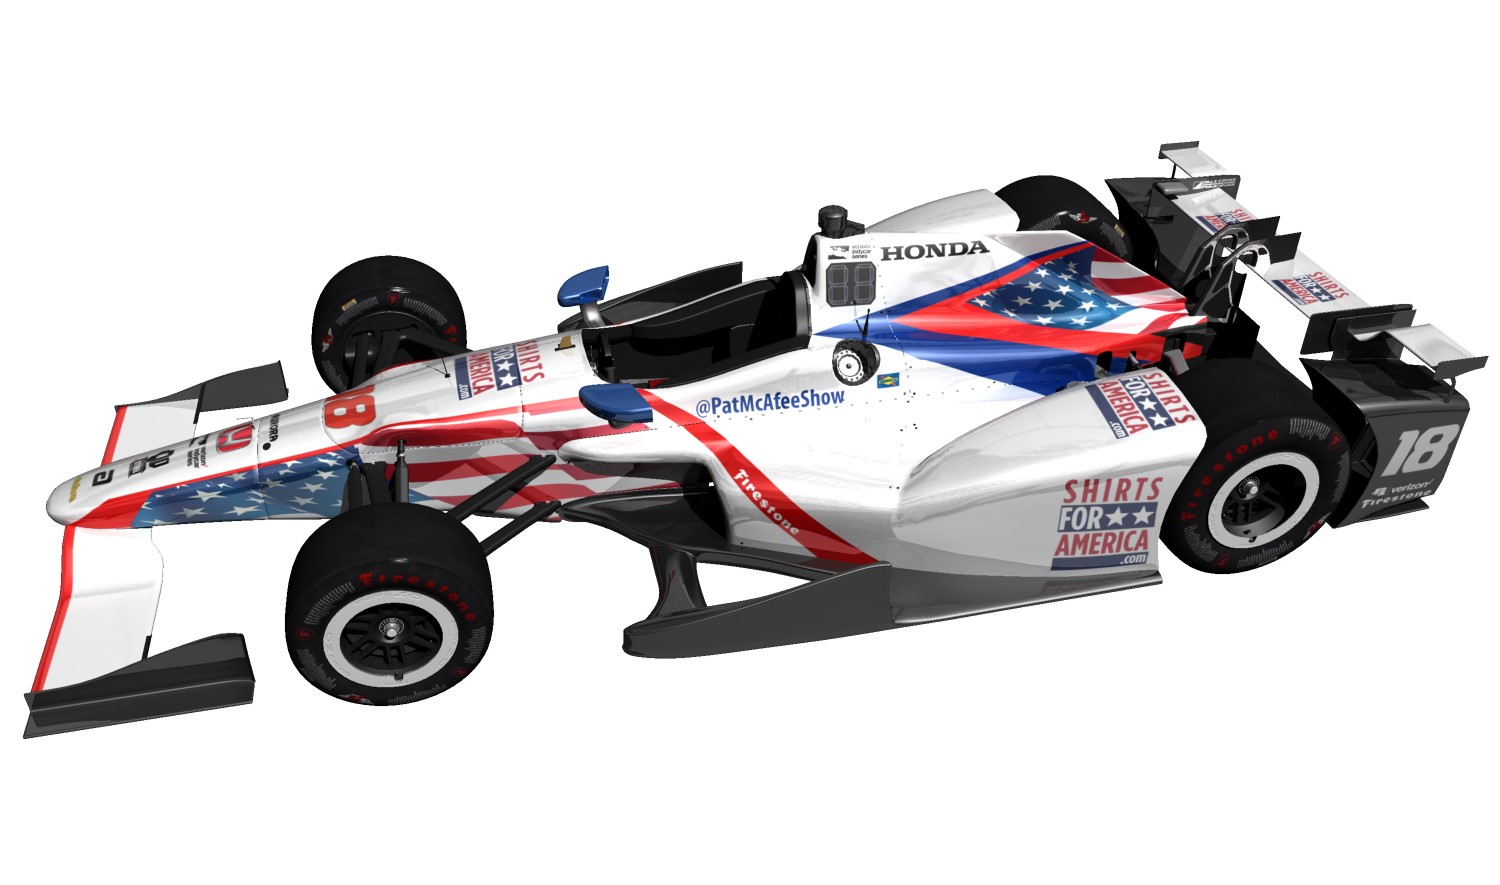 Daly's new livery